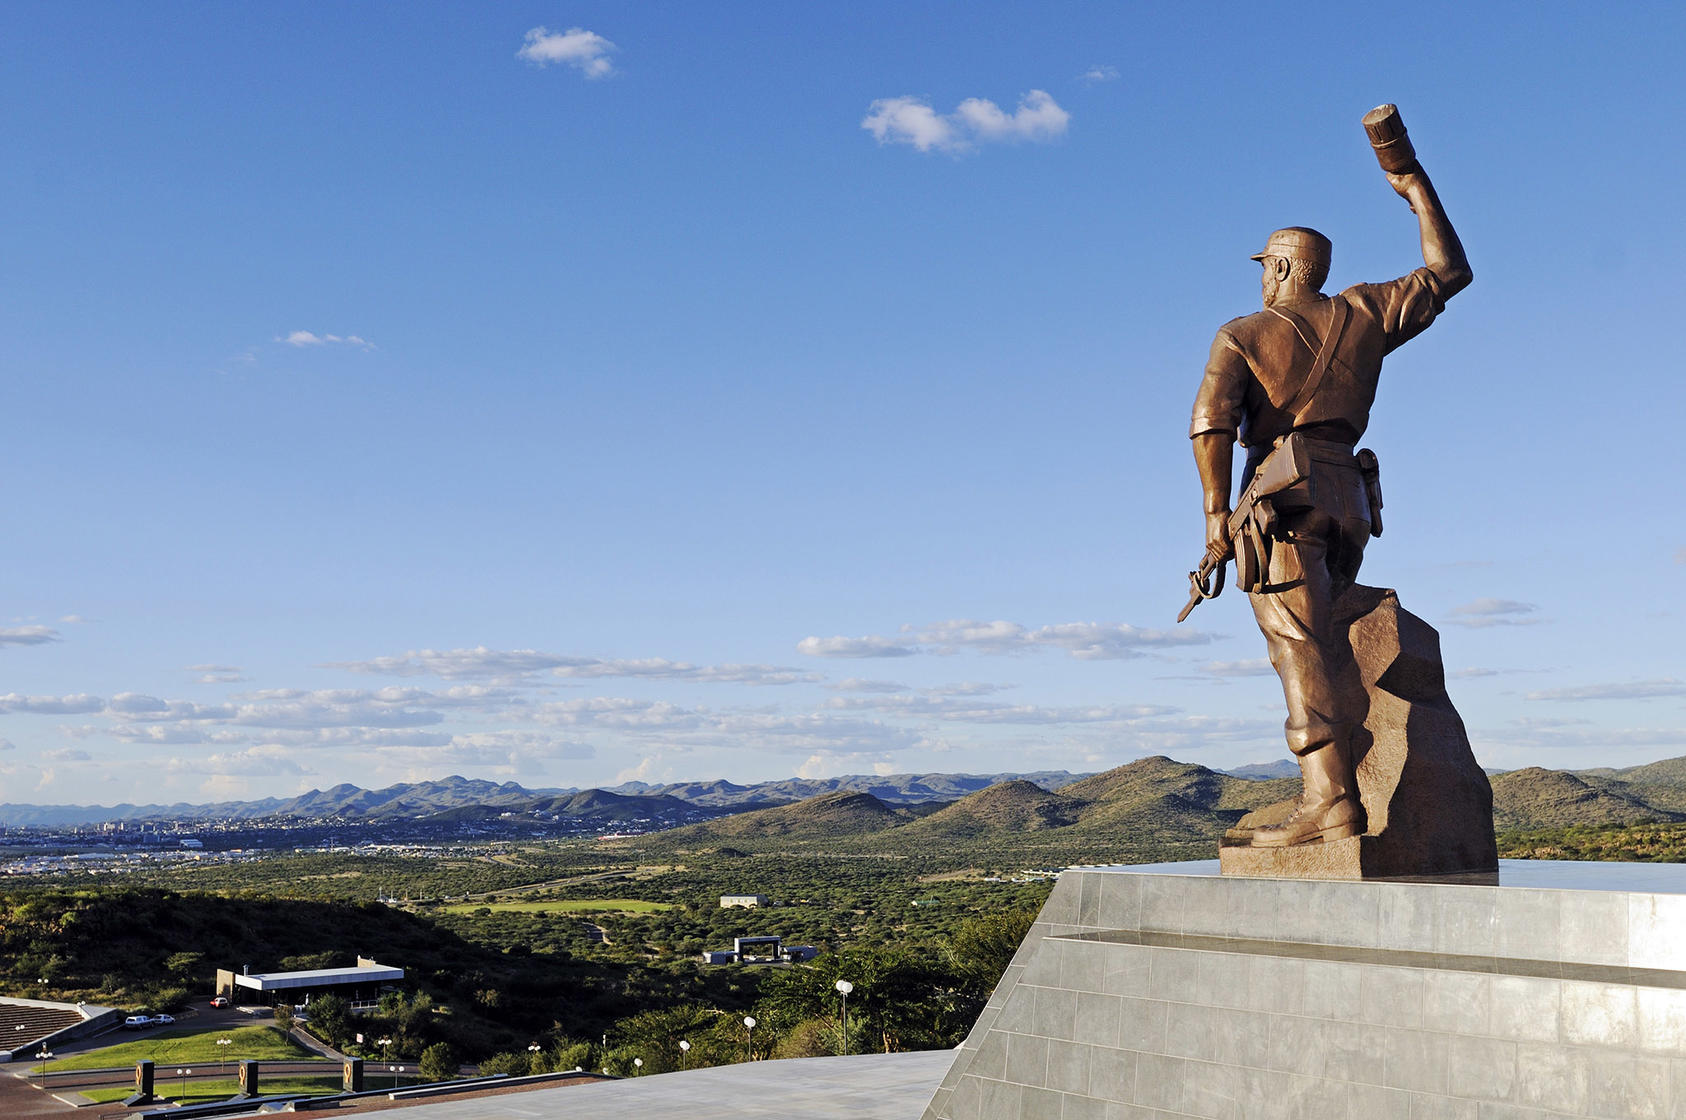 The Unknown Soldier statue, constructed by North Korea, at the Heroes’ Acre memorial near Windhoek, Namibia. (Oliver Gerhard/ Shutterstock)